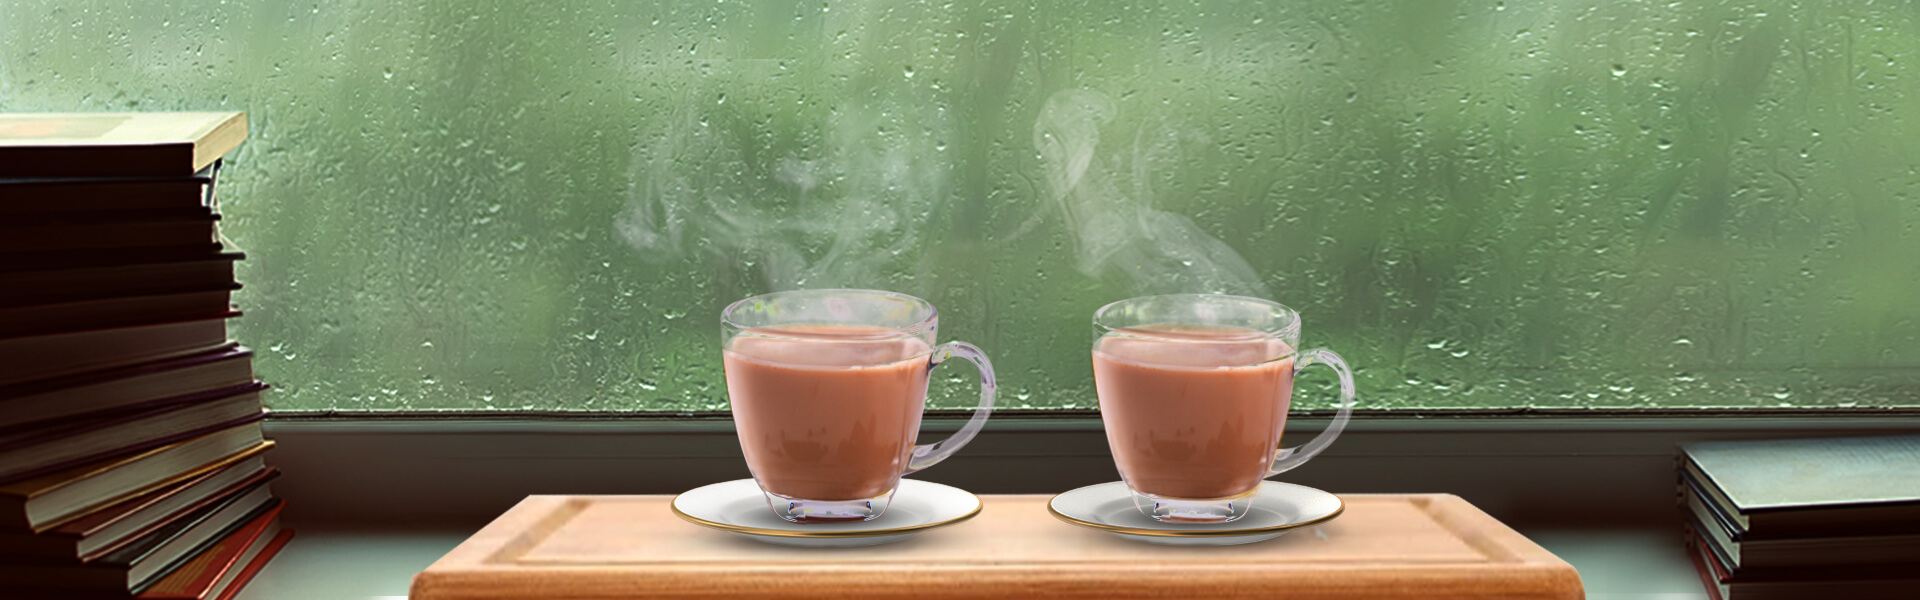 Two Tea Cups filled with tea kept on study table with monsoon window view